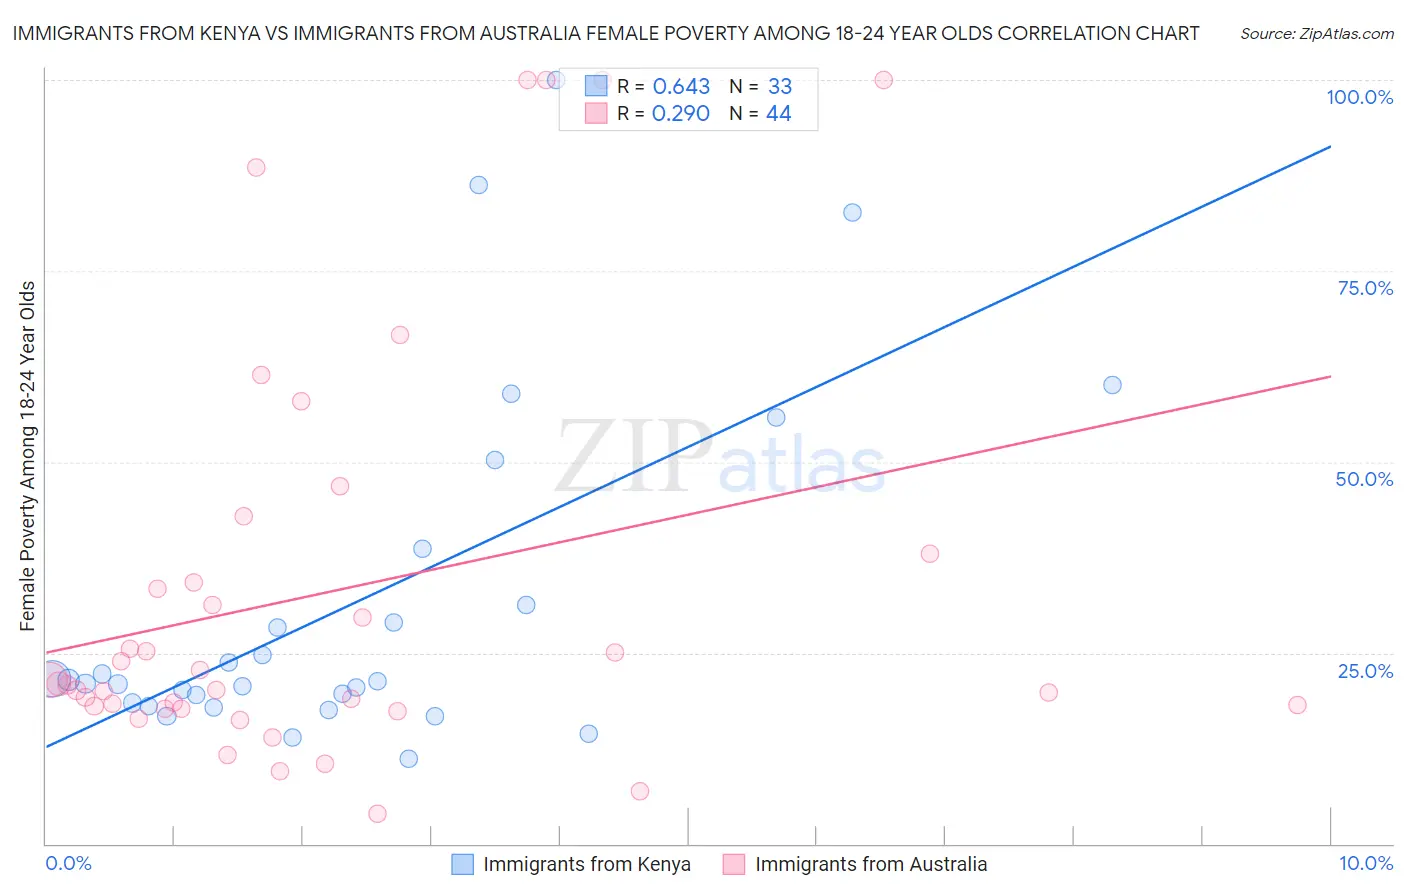 Immigrants from Kenya vs Immigrants from Australia Female Poverty Among 18-24 Year Olds